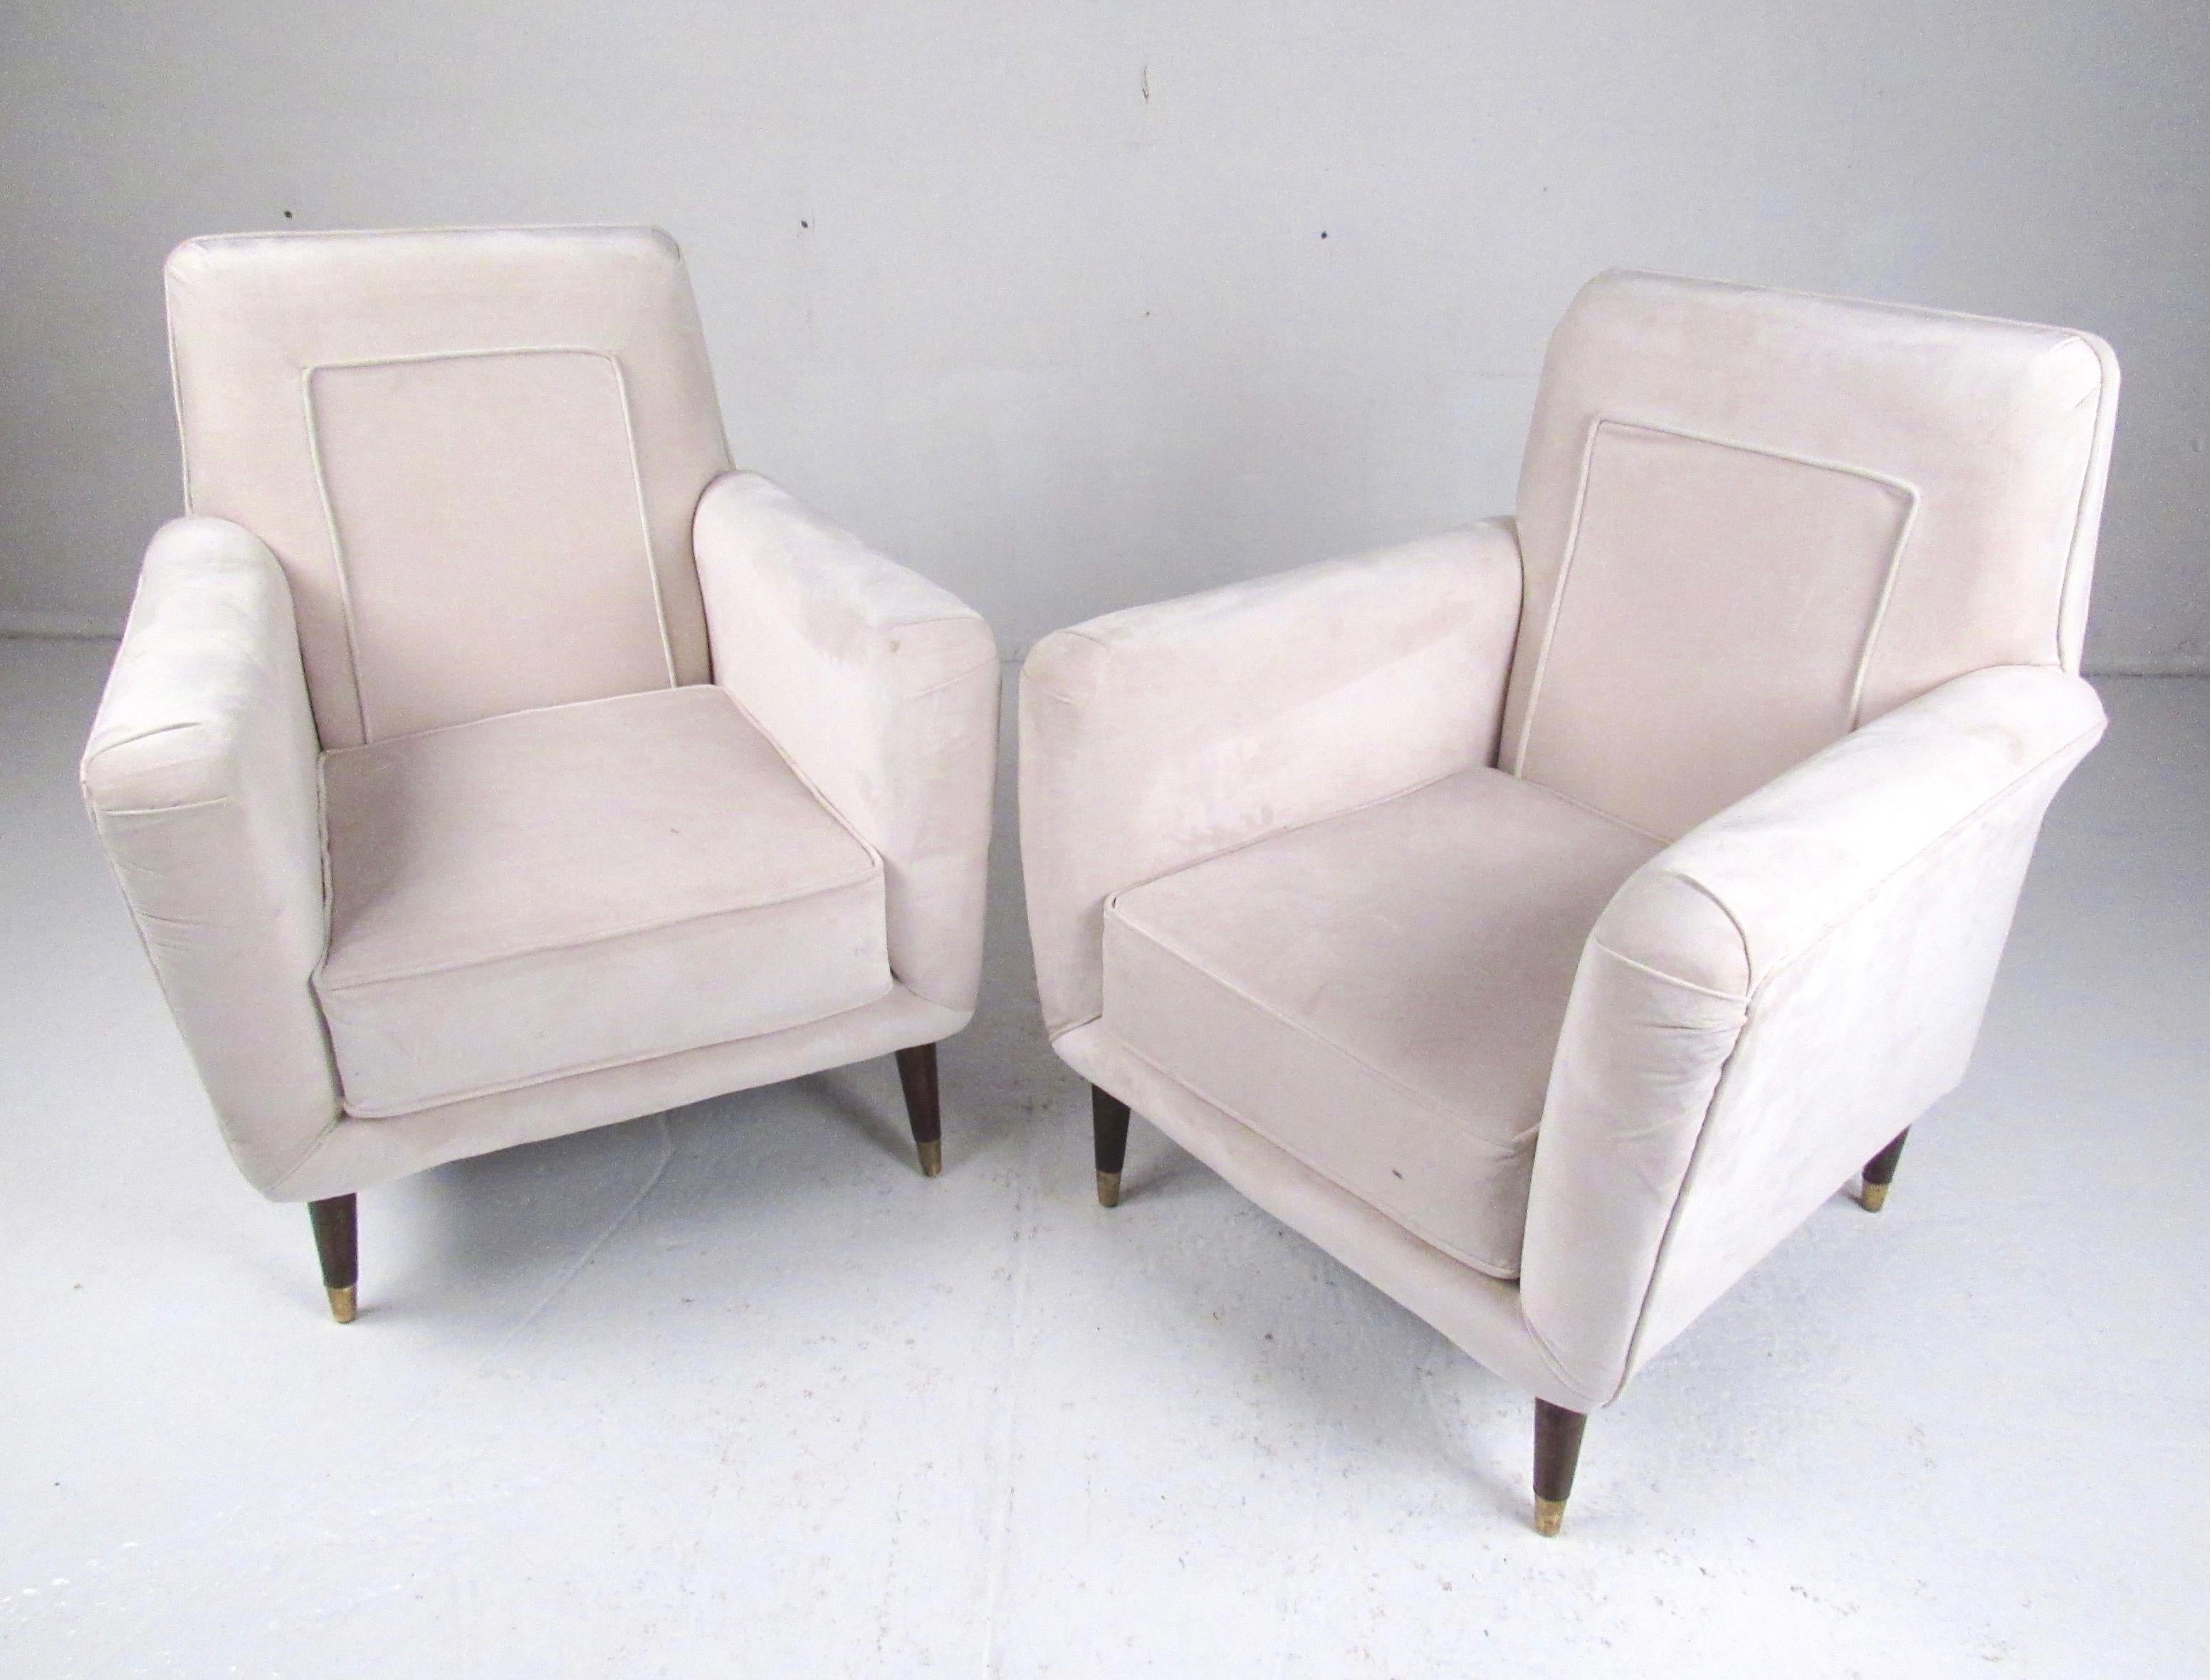 Stylish pair of vintage modern armchairs feature shapely upholstered seats/backs paired with tapered walnut legs complete with brass sabot feet. Simple mid-century modern style lounge chairs make a comfortable pair of lounge chairs for home or